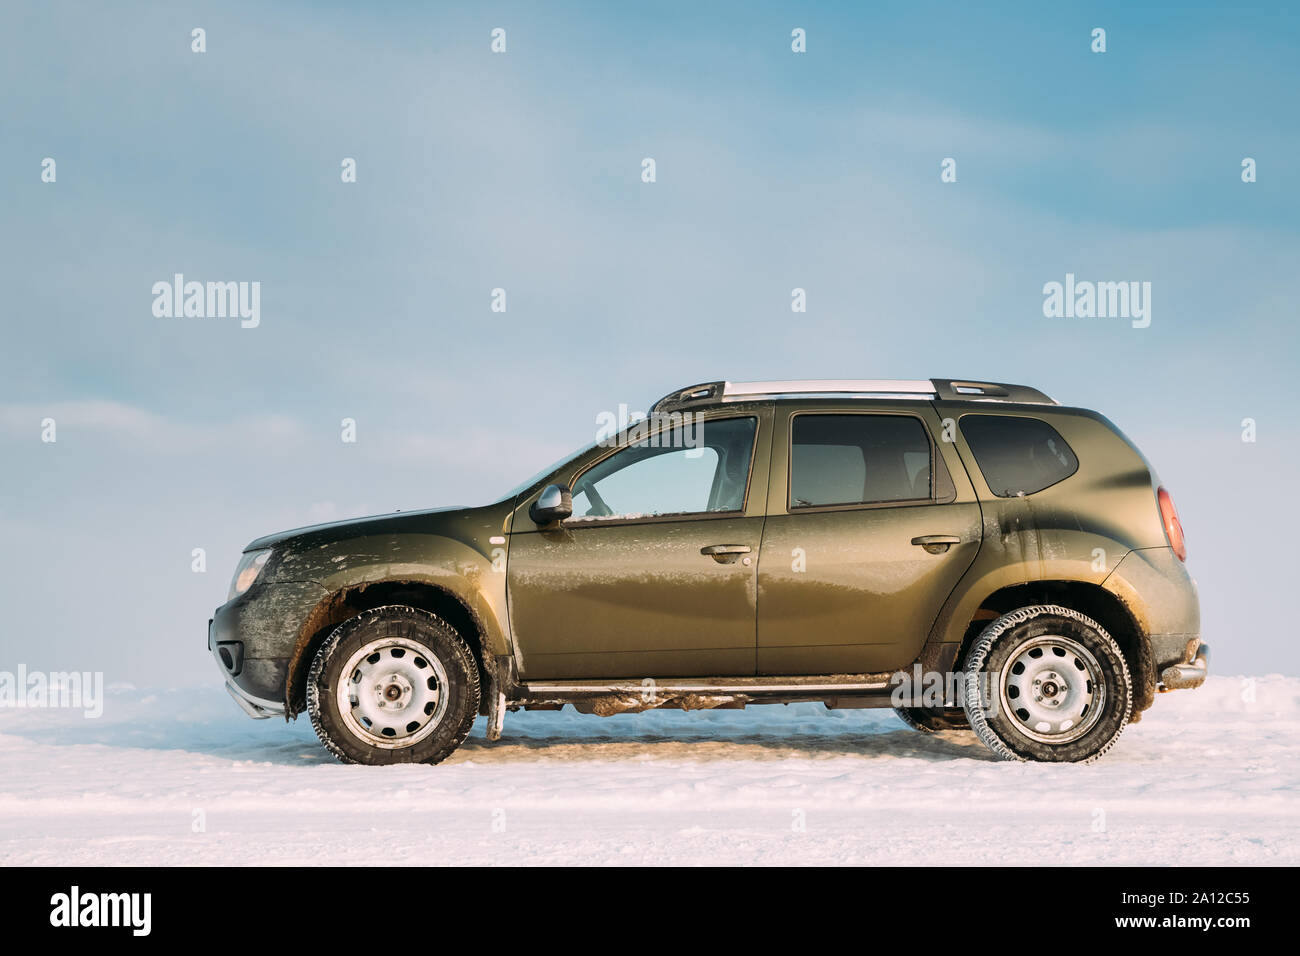 Gomel, Belarus - January 10, 2019: Car Renault Duster Or Dacia Duster Suv Parked On Roadside At Winter Day. Duster Produced Jointly By French Manufact Stock Photo